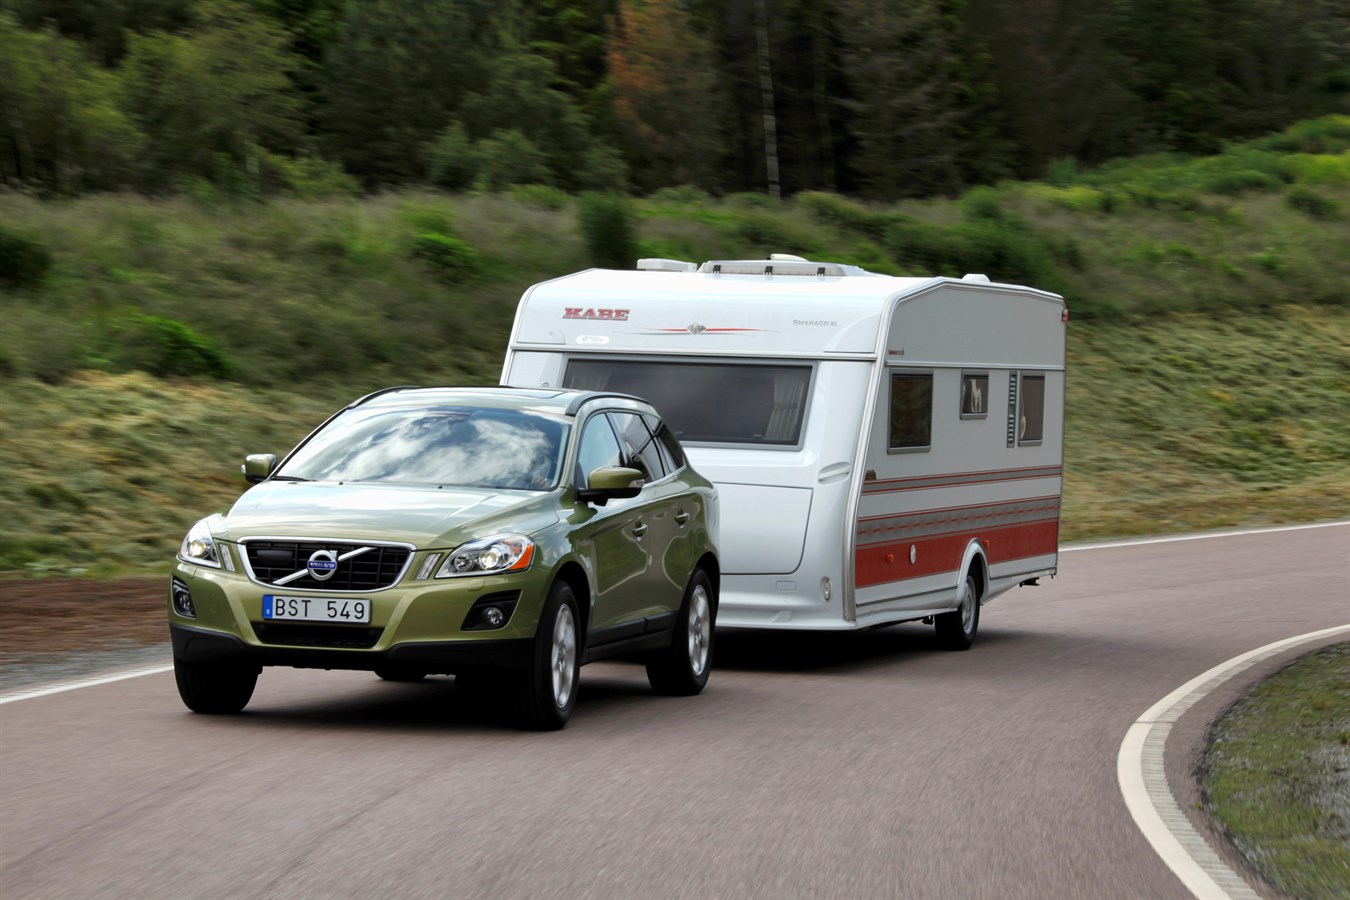 Trailer Stability Assist, technology that brakes runaway trailers.